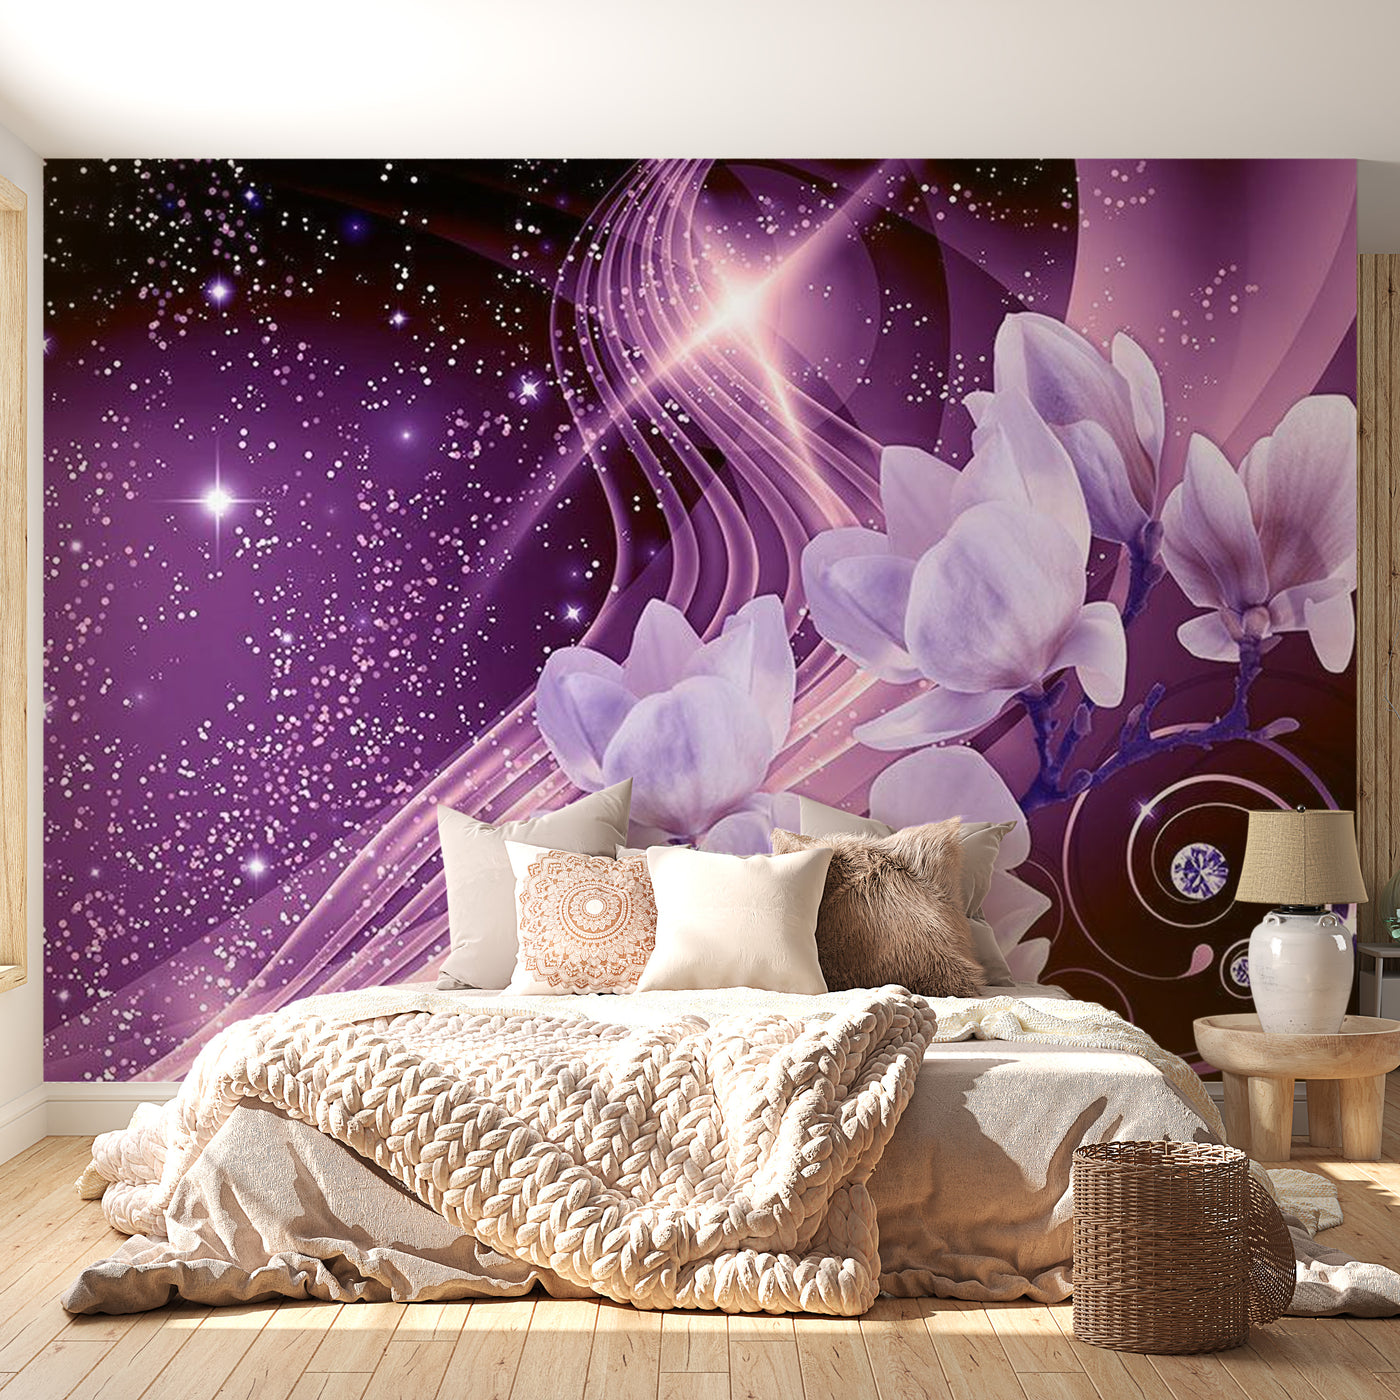 Most Popular Self-Adhesive and Removable Wall Decals